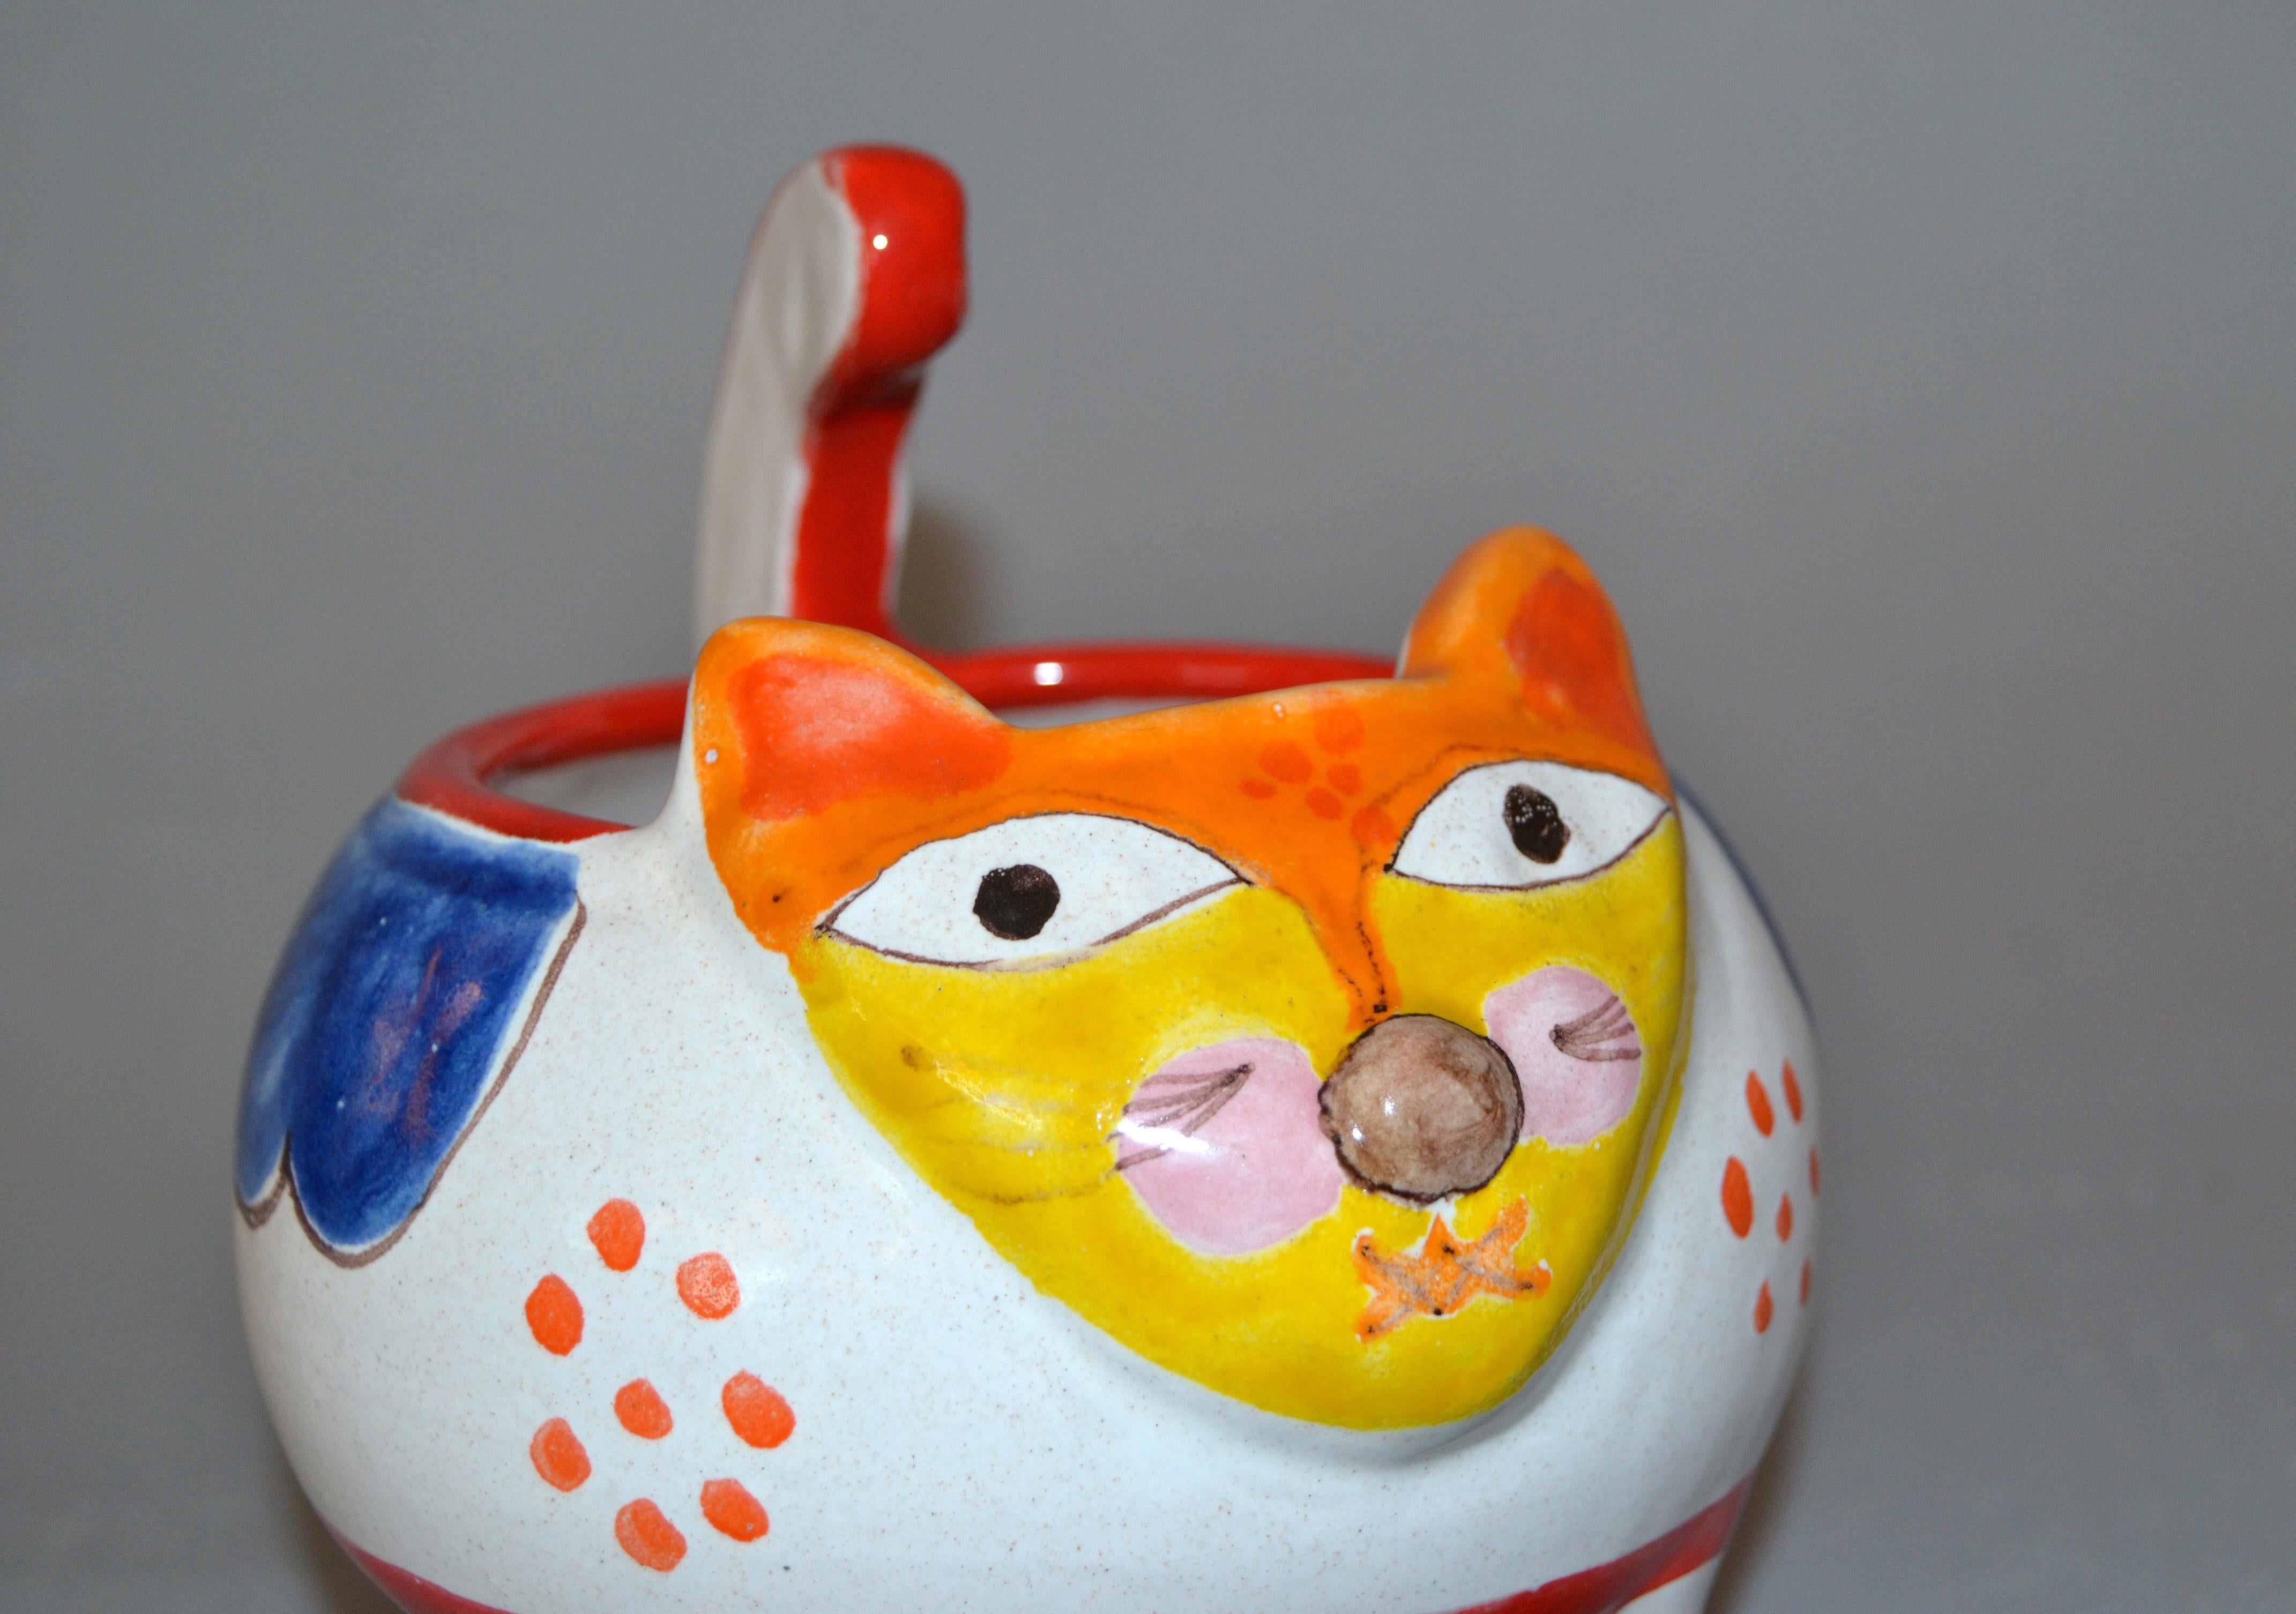 A glazed and colorful DeSimone hand painted art pottery cat bowl from Italy made for Gump's.
The painting on the bowl depicts a cat. 
The bowl is 6.5 inches high and 5.5 inches deep by 6.0 inches wide.
It is in excellent condition with no chips